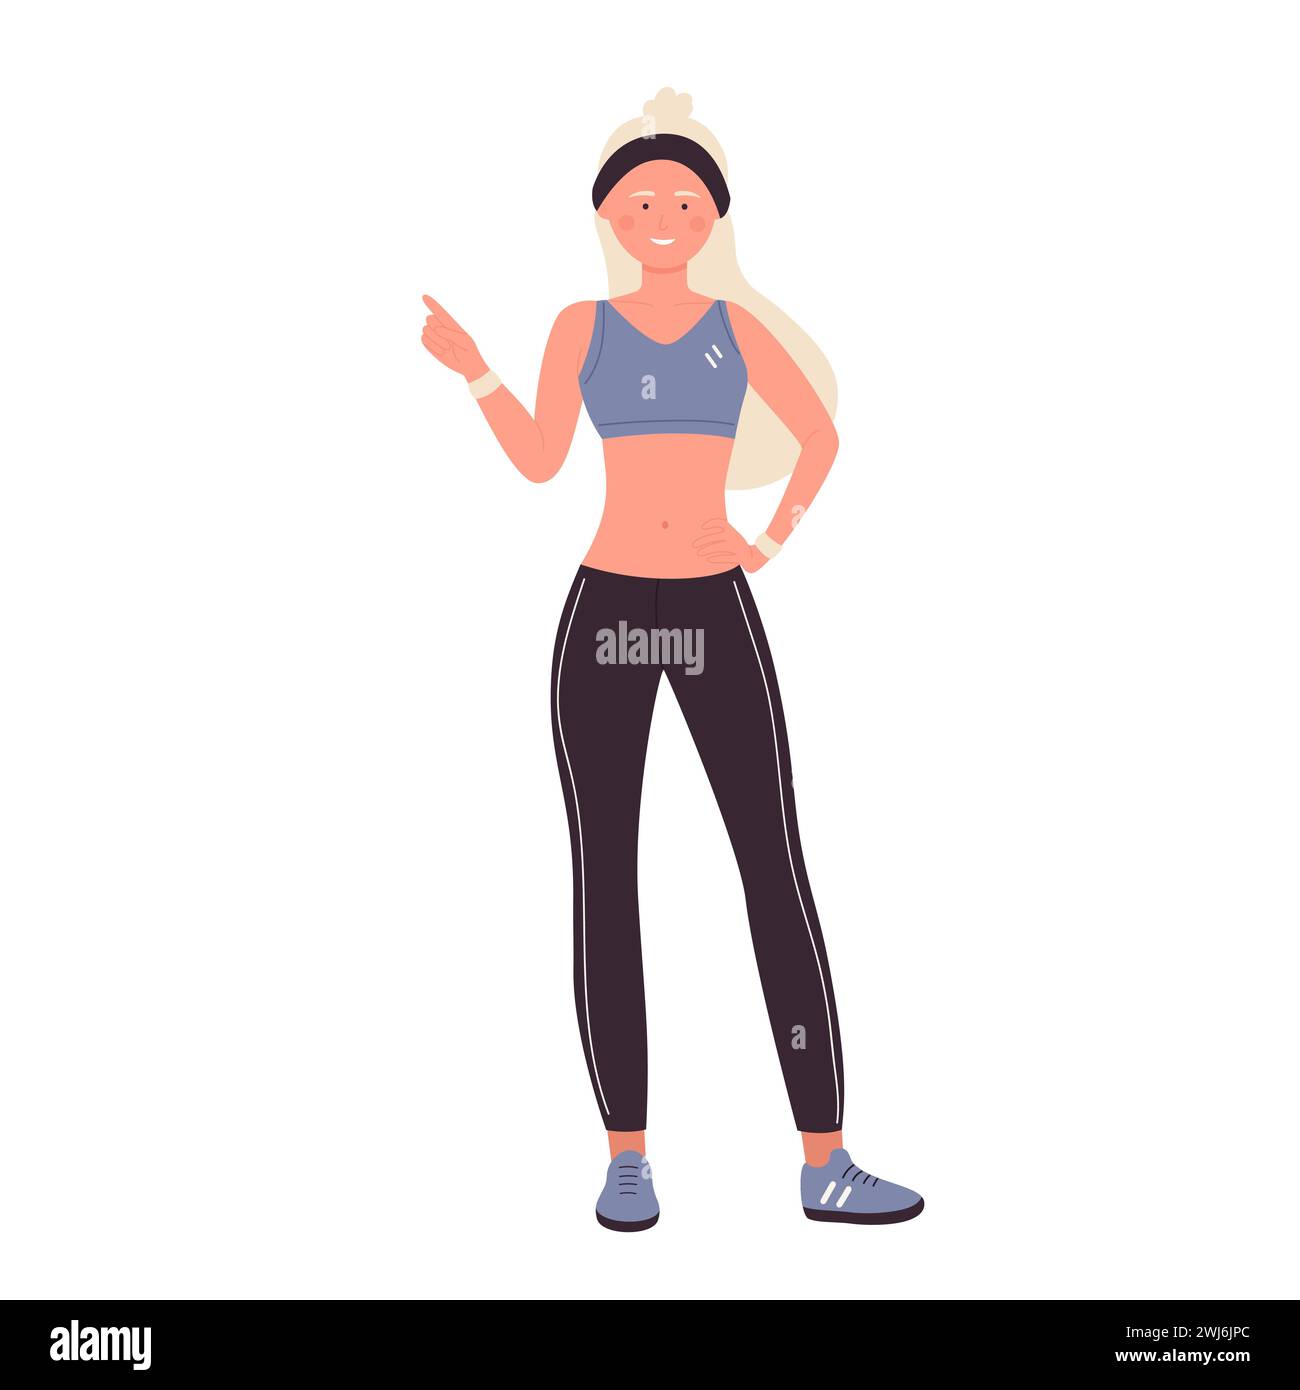 Pointing woman coach. Gym fitness trainer, aerobics training, sport practice vector illustration Stock Vector